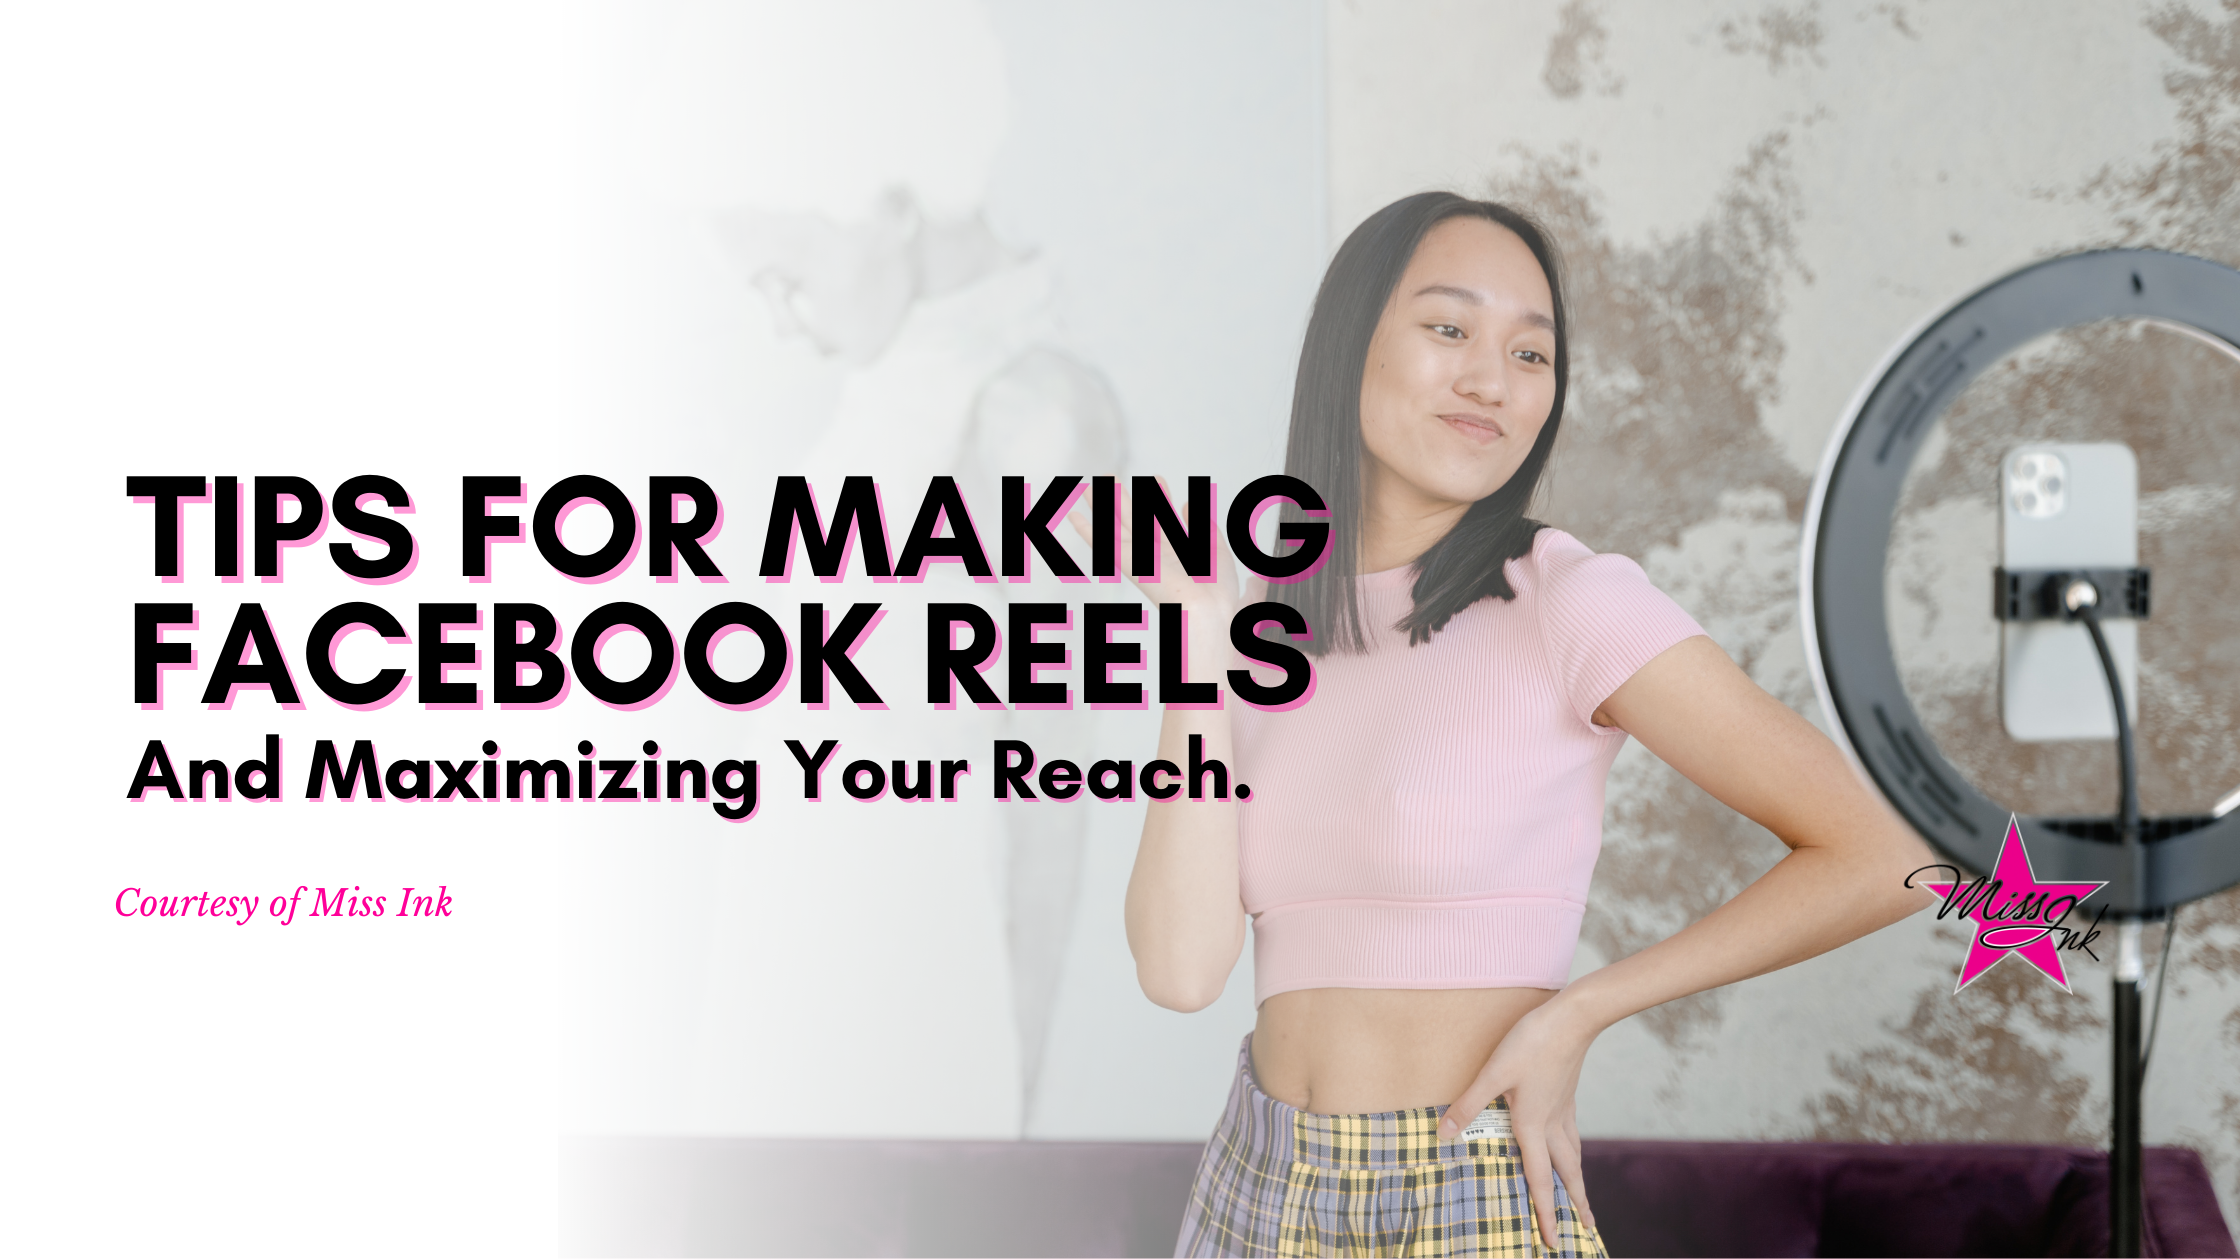 Tips For Making Facebook Reels And Maximizing Your Reach.